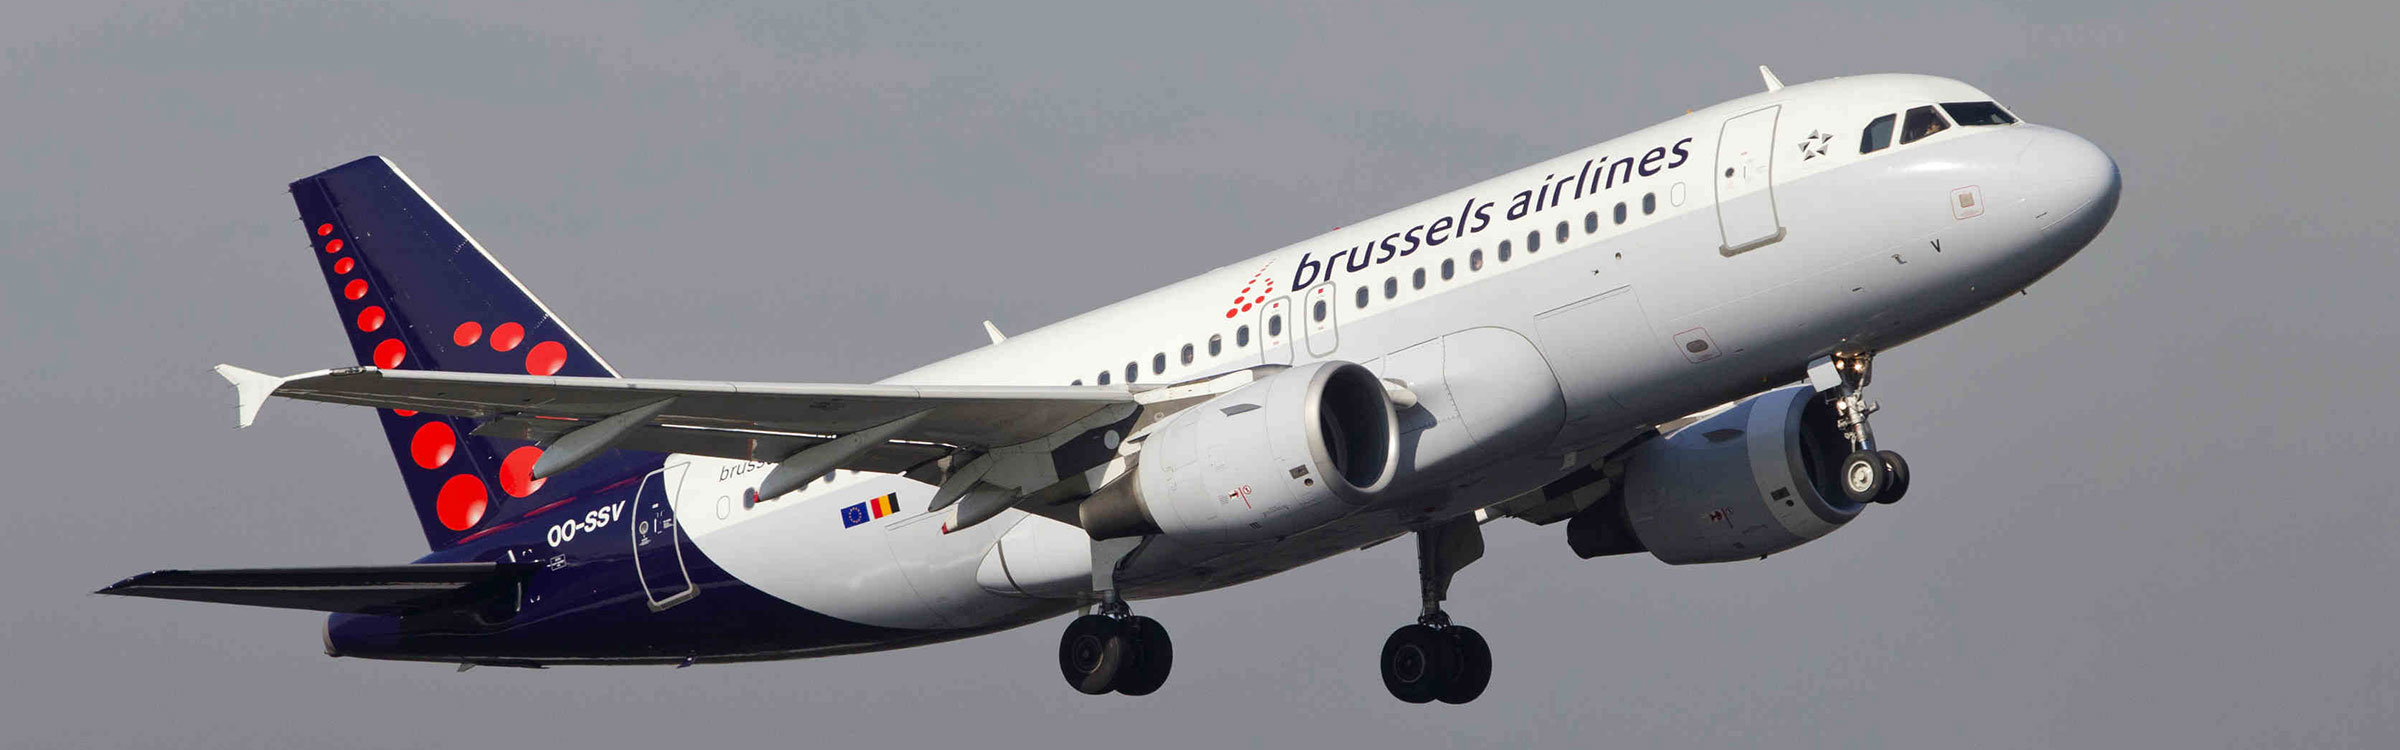 Brussels airlines2